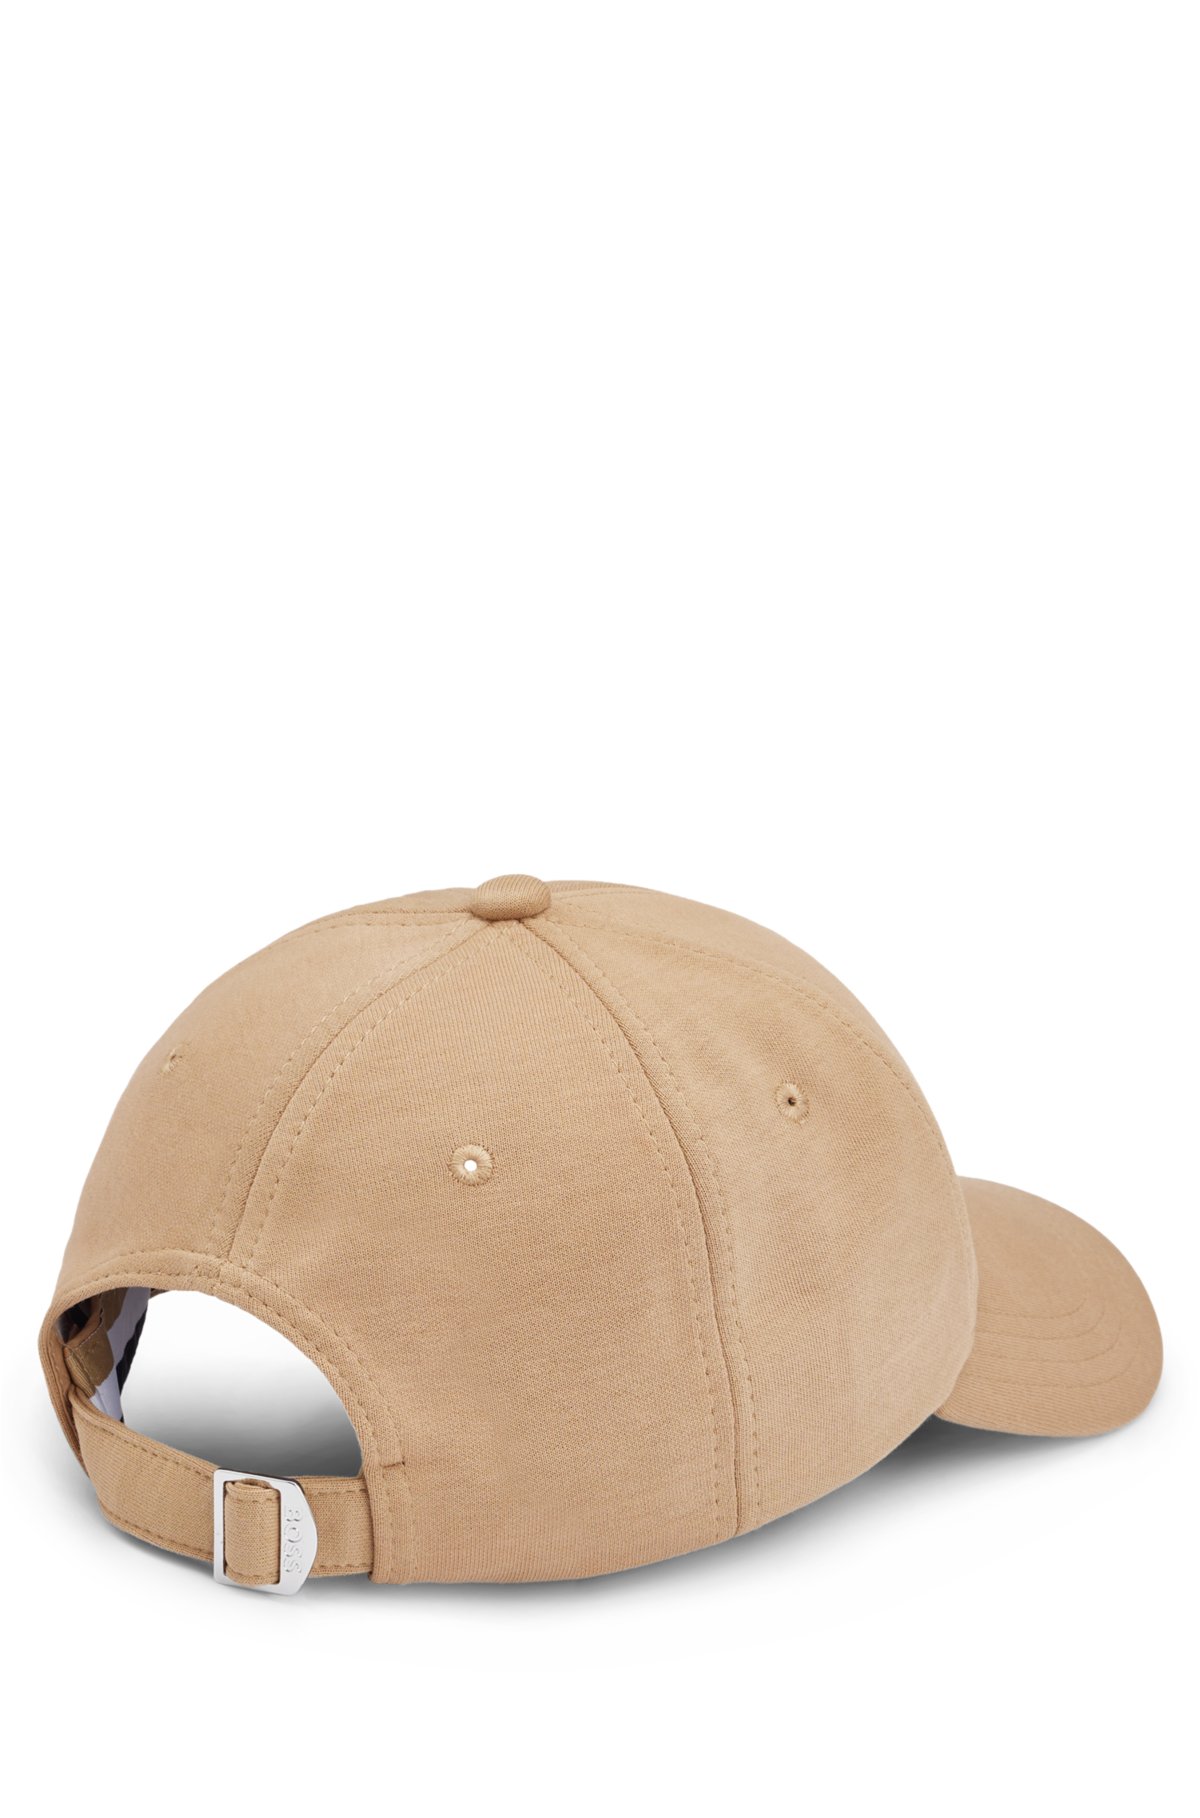 Cotton-blend cap with embroidered double monogram, Beige